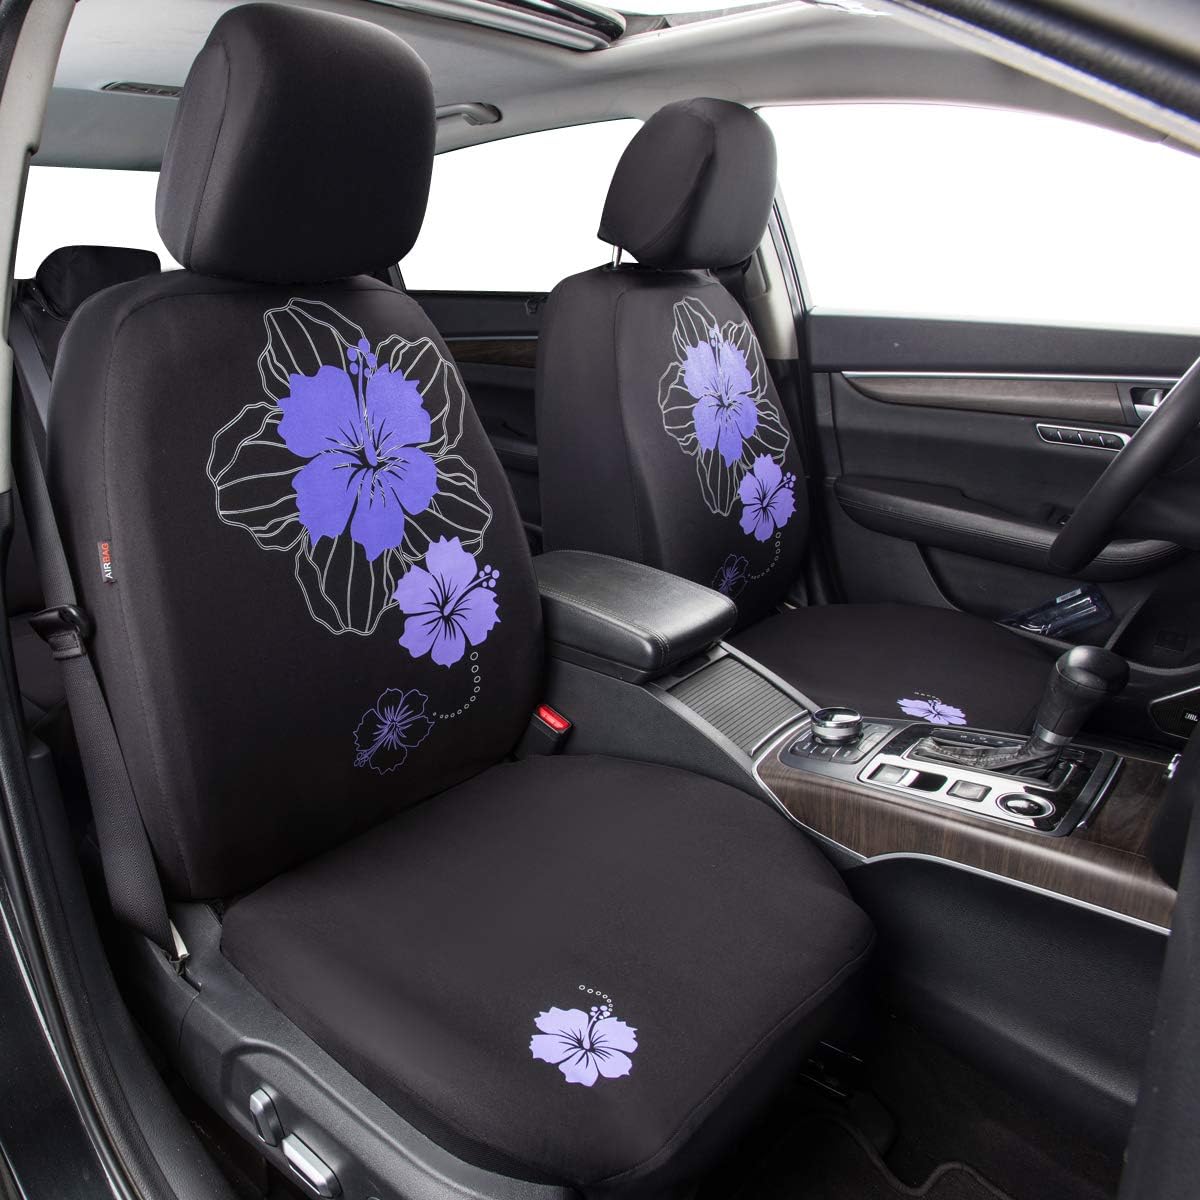 CAR PASS Pretty Flower Universal Seat Covers and 4 Pice Waterproof Anti-Slip Nibs Car Floor Mats for Women Cute Girly Fit 95% Automotive,SUVS,Sedan,Vans (Black with Purple)